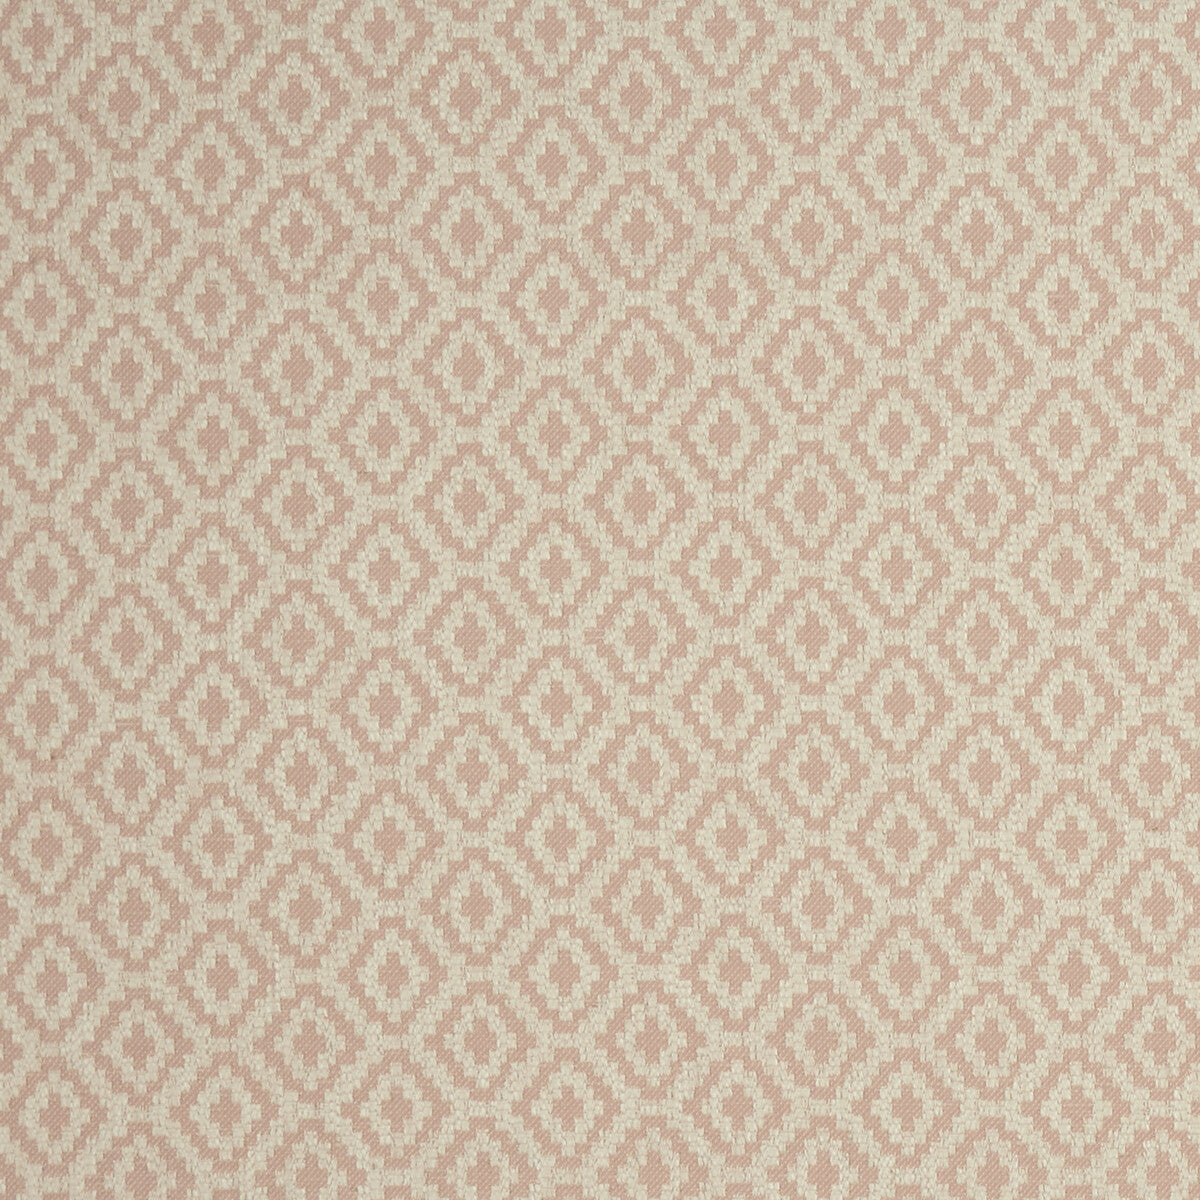 Keaton fabric in blush color - pattern F1045/01.CAC.0 - by Clarke And Clarke in the Clarke &amp; Clarke Castle Garden collection